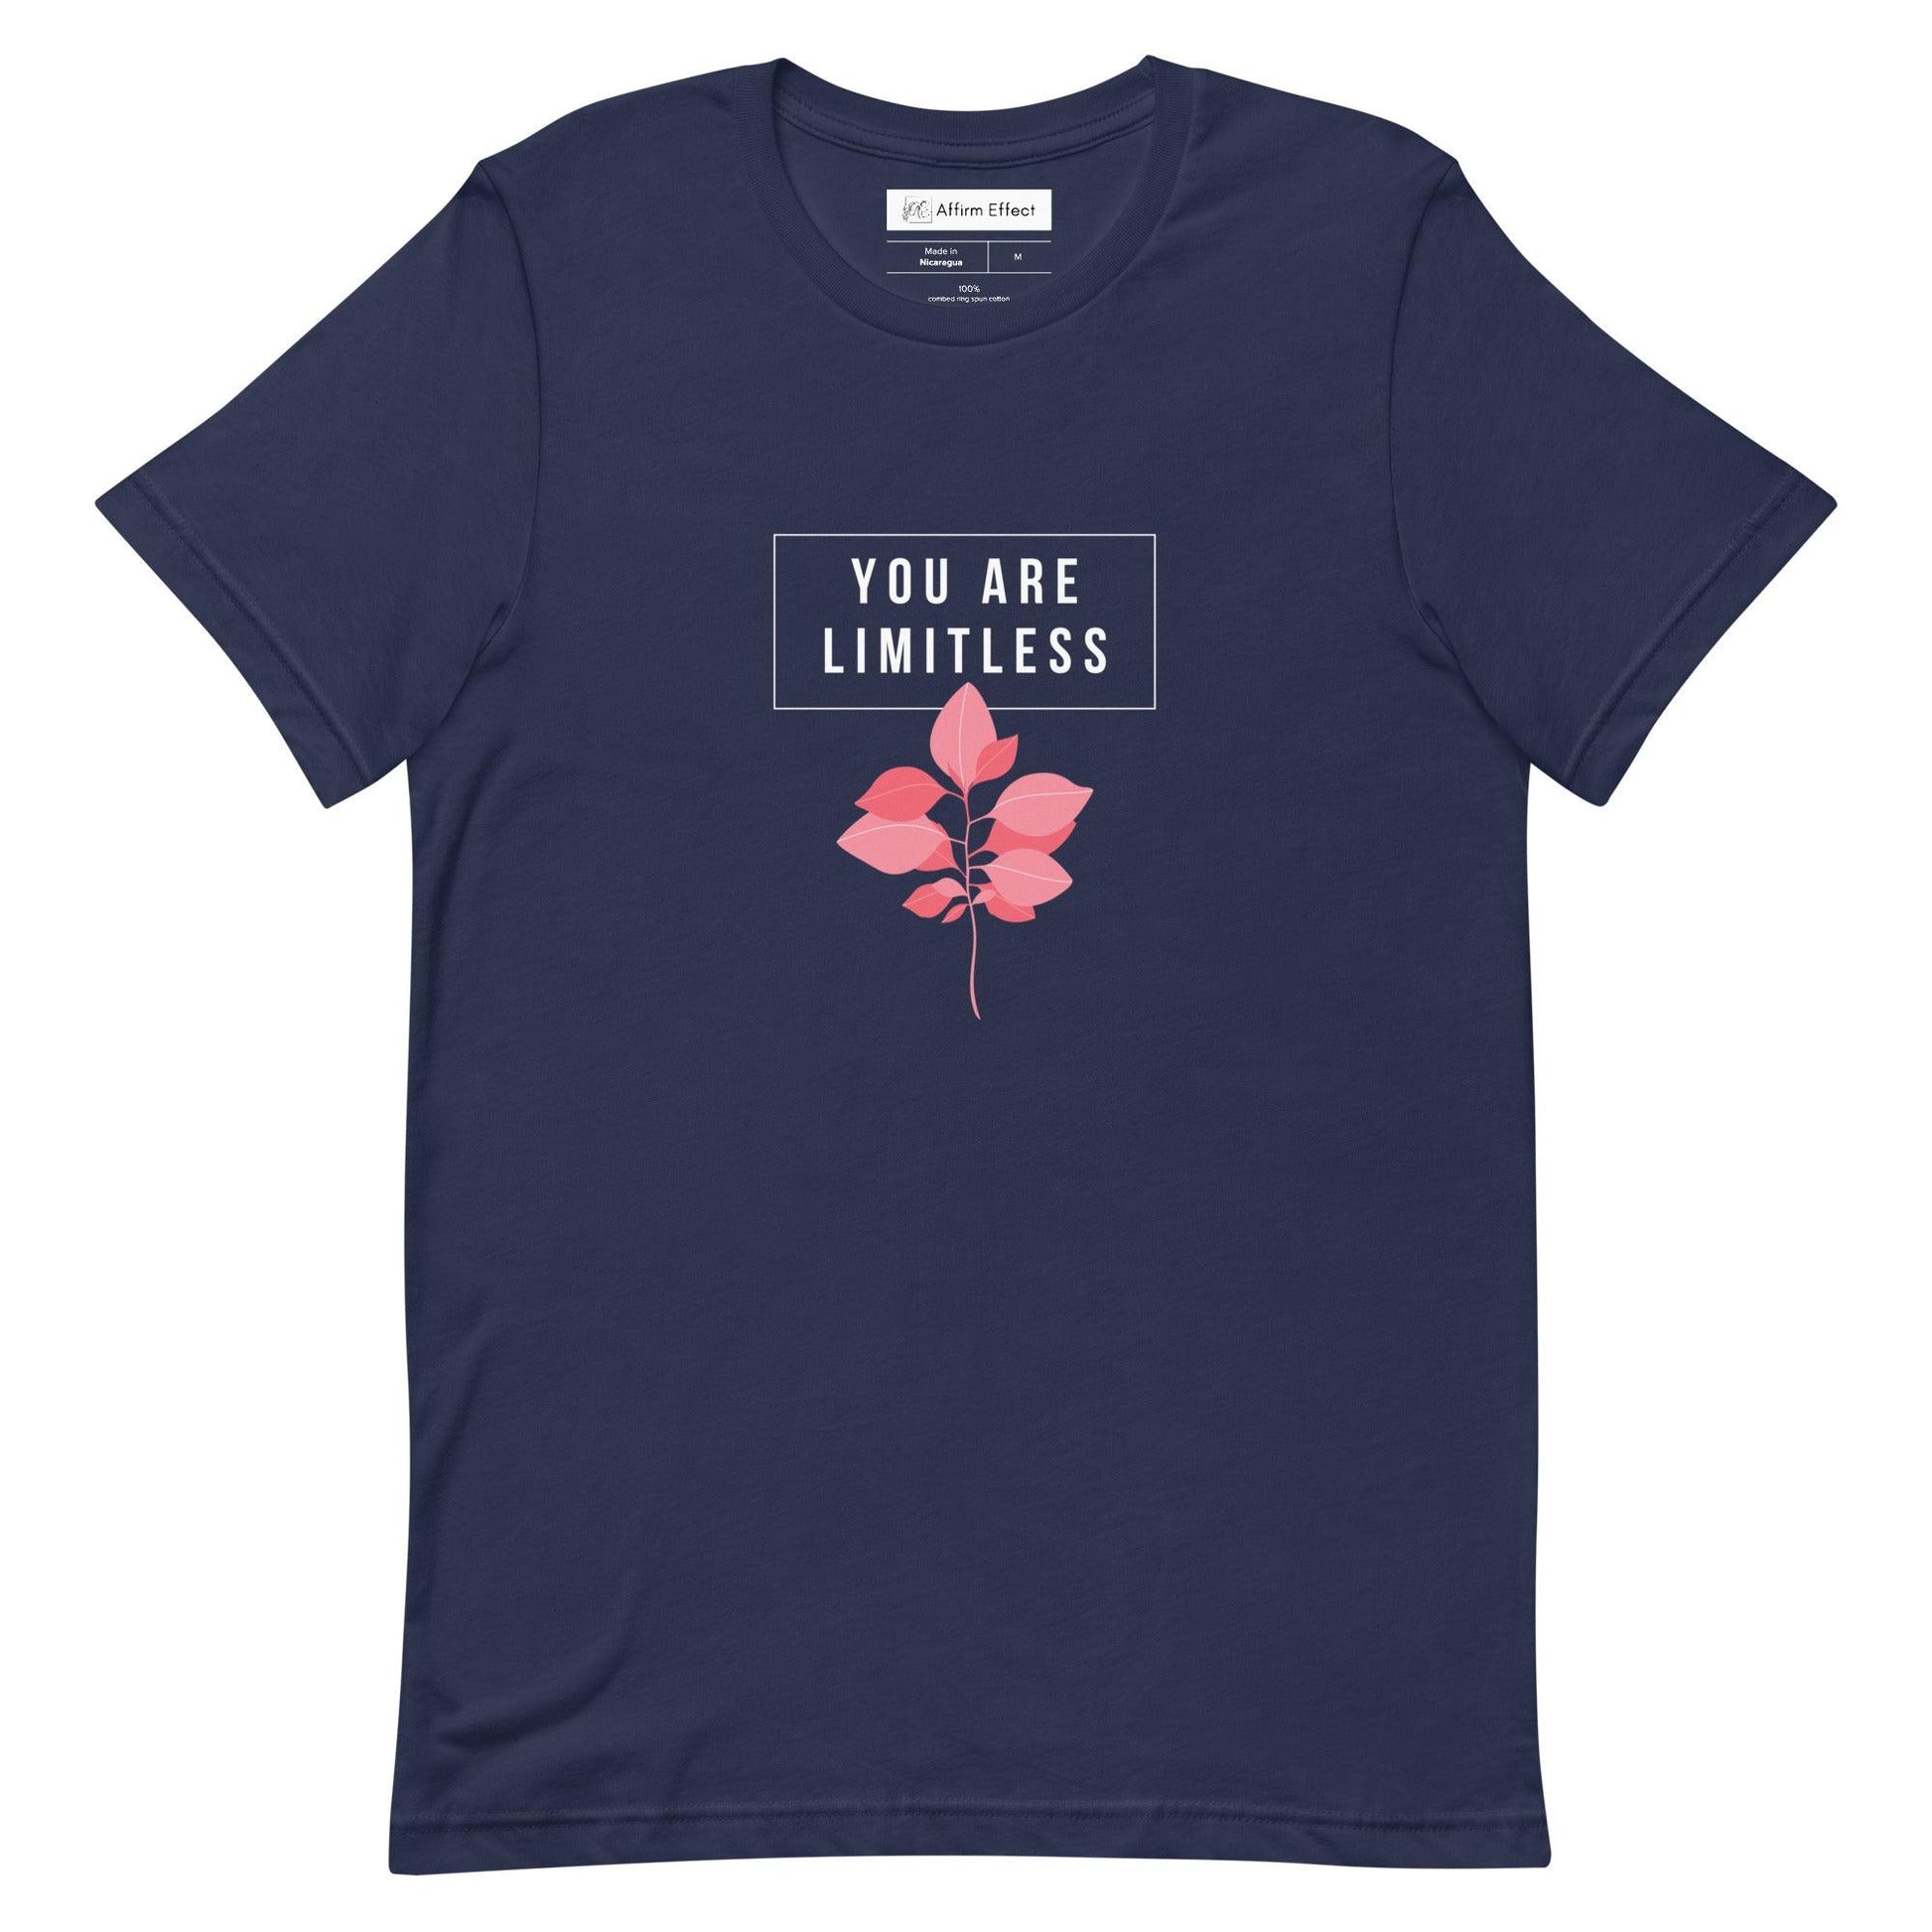 You Are Limitless, Premium Short-Sleeve Unisex T-Shirt | Positive Affirmation Tee - Affirm Effect